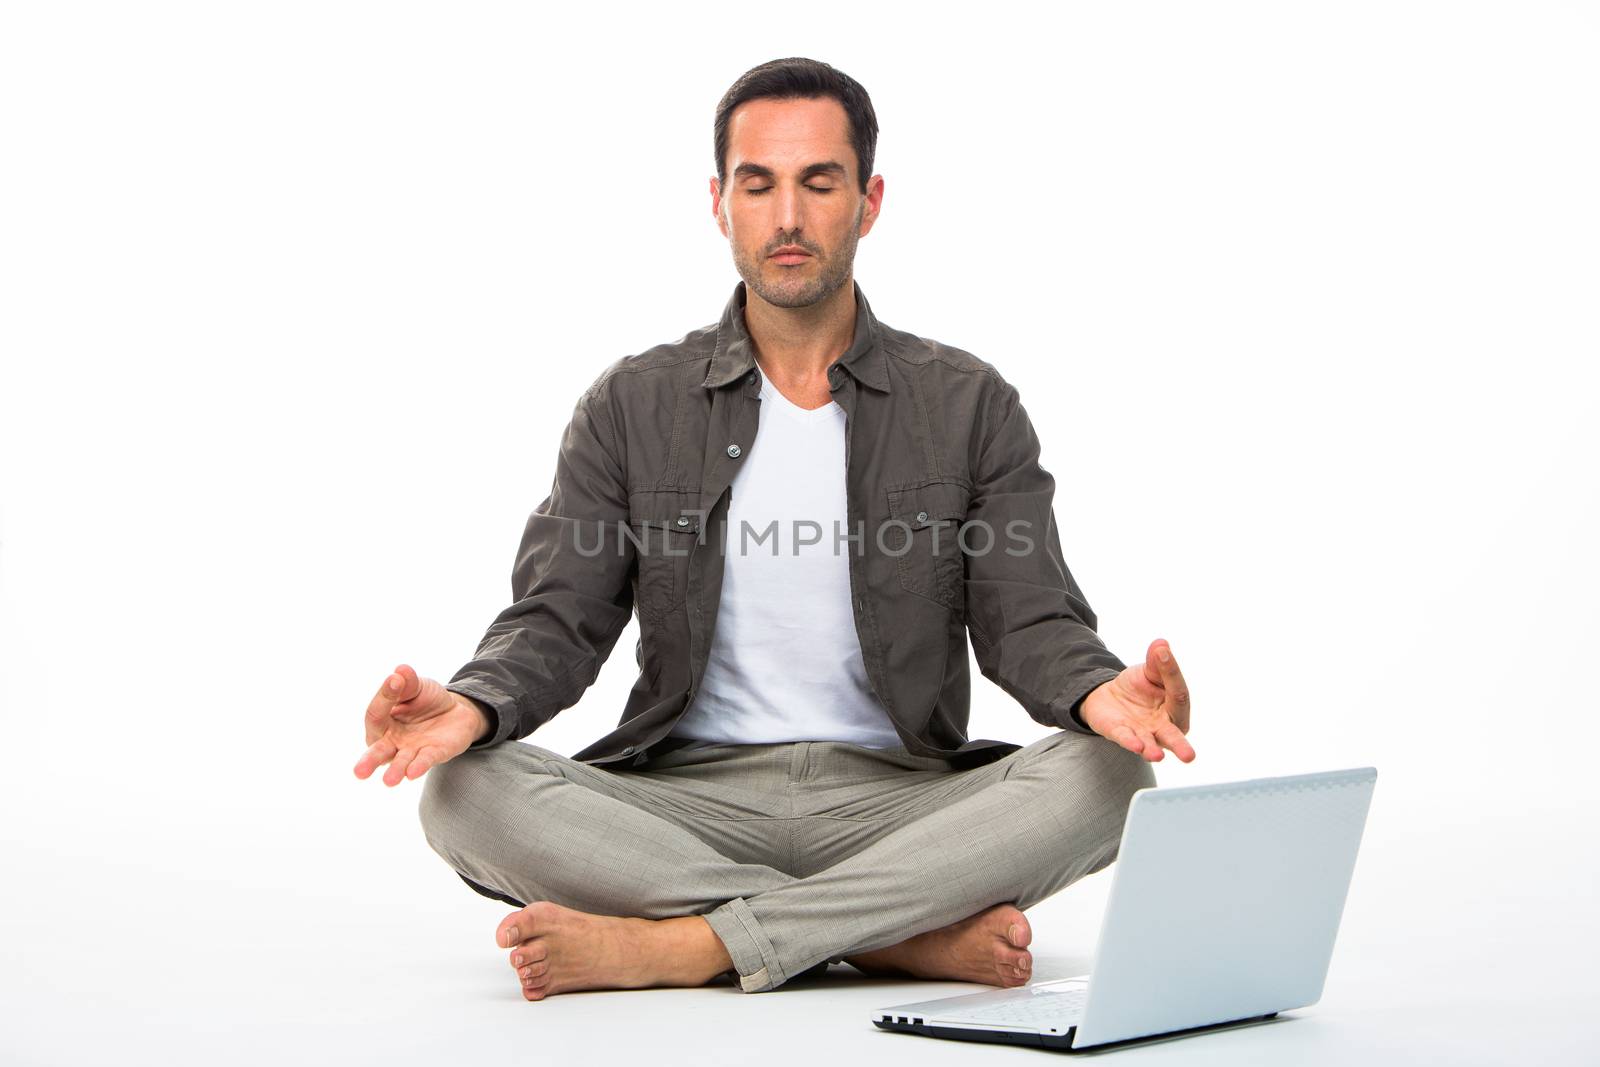 Man sitted on the floor with eyes closed practicing yoga with laptop next to him